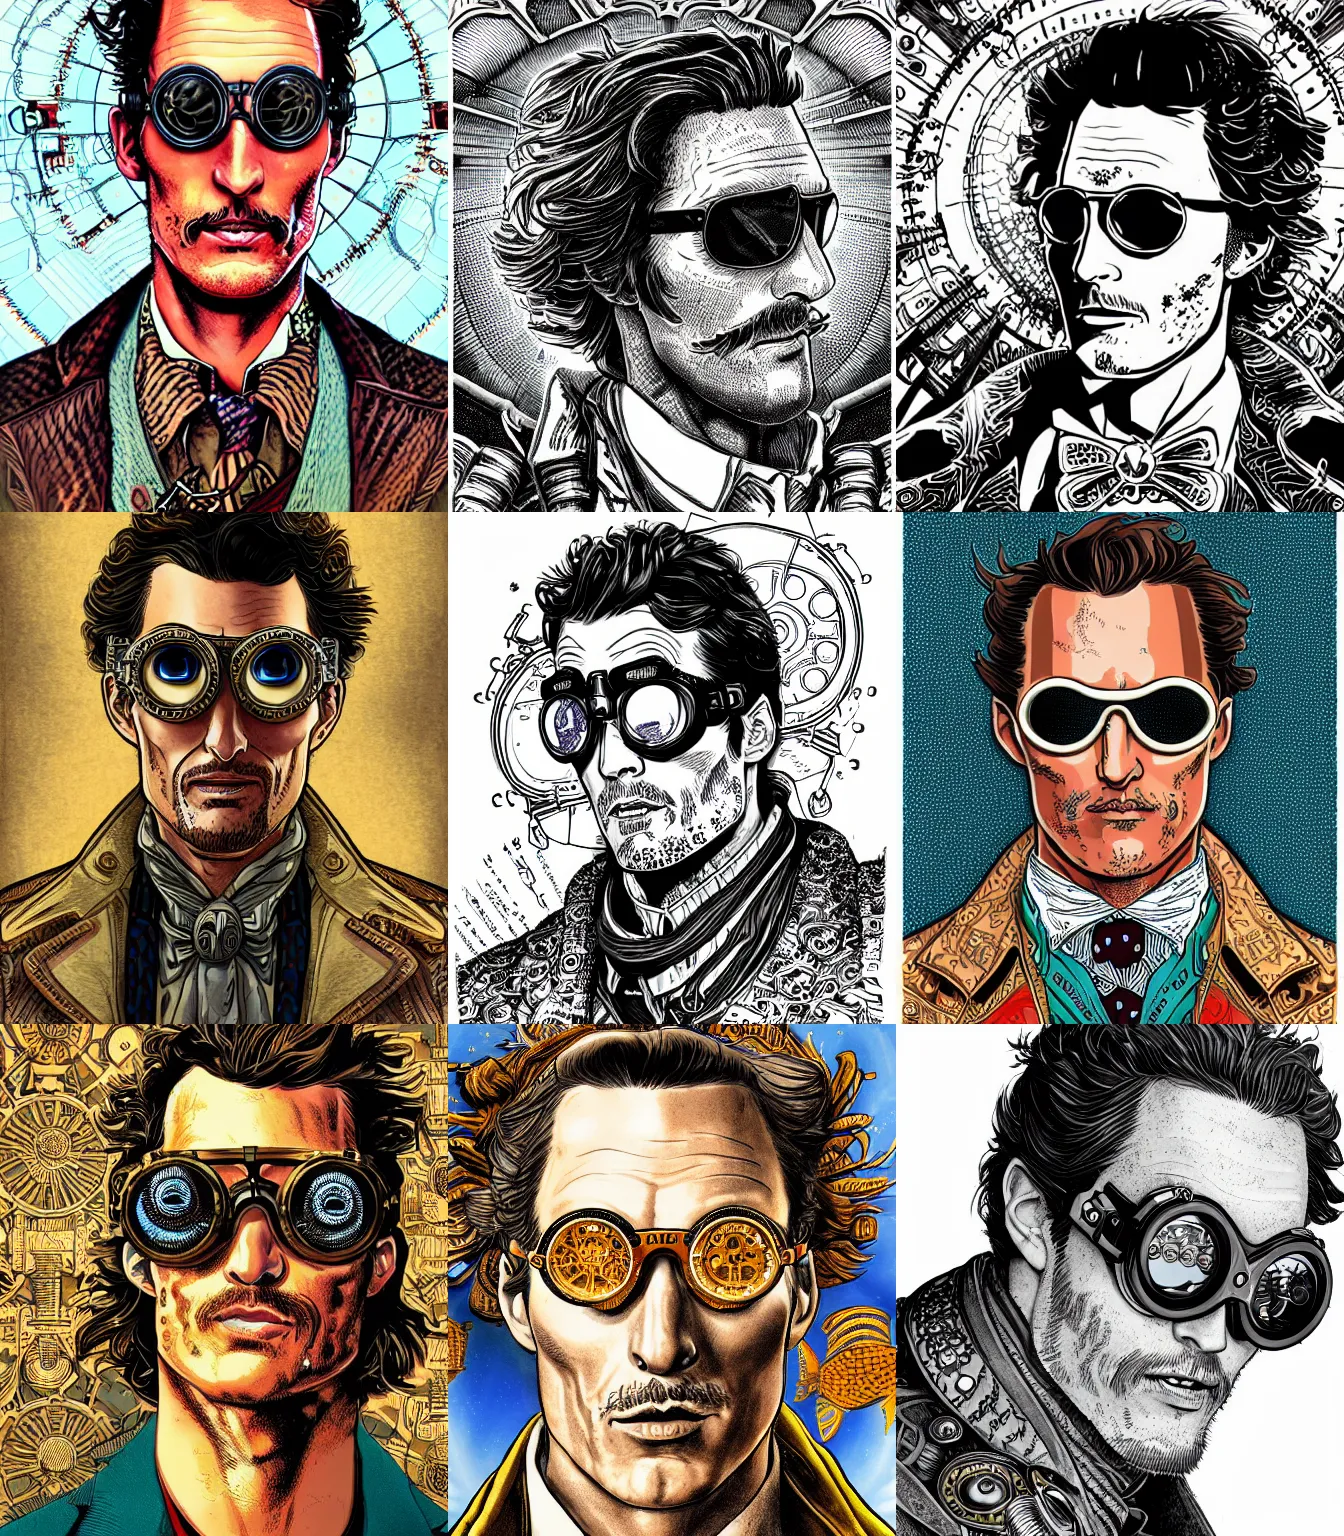 Prompt: hyper detailed comic illustration of a steampunk matthew mcconaughey wearing goggles and an intricate Victorian jacket, markings on his face, by Hayao Miyazaki intricate details, vibrant, solid background, low angle fish eye lens